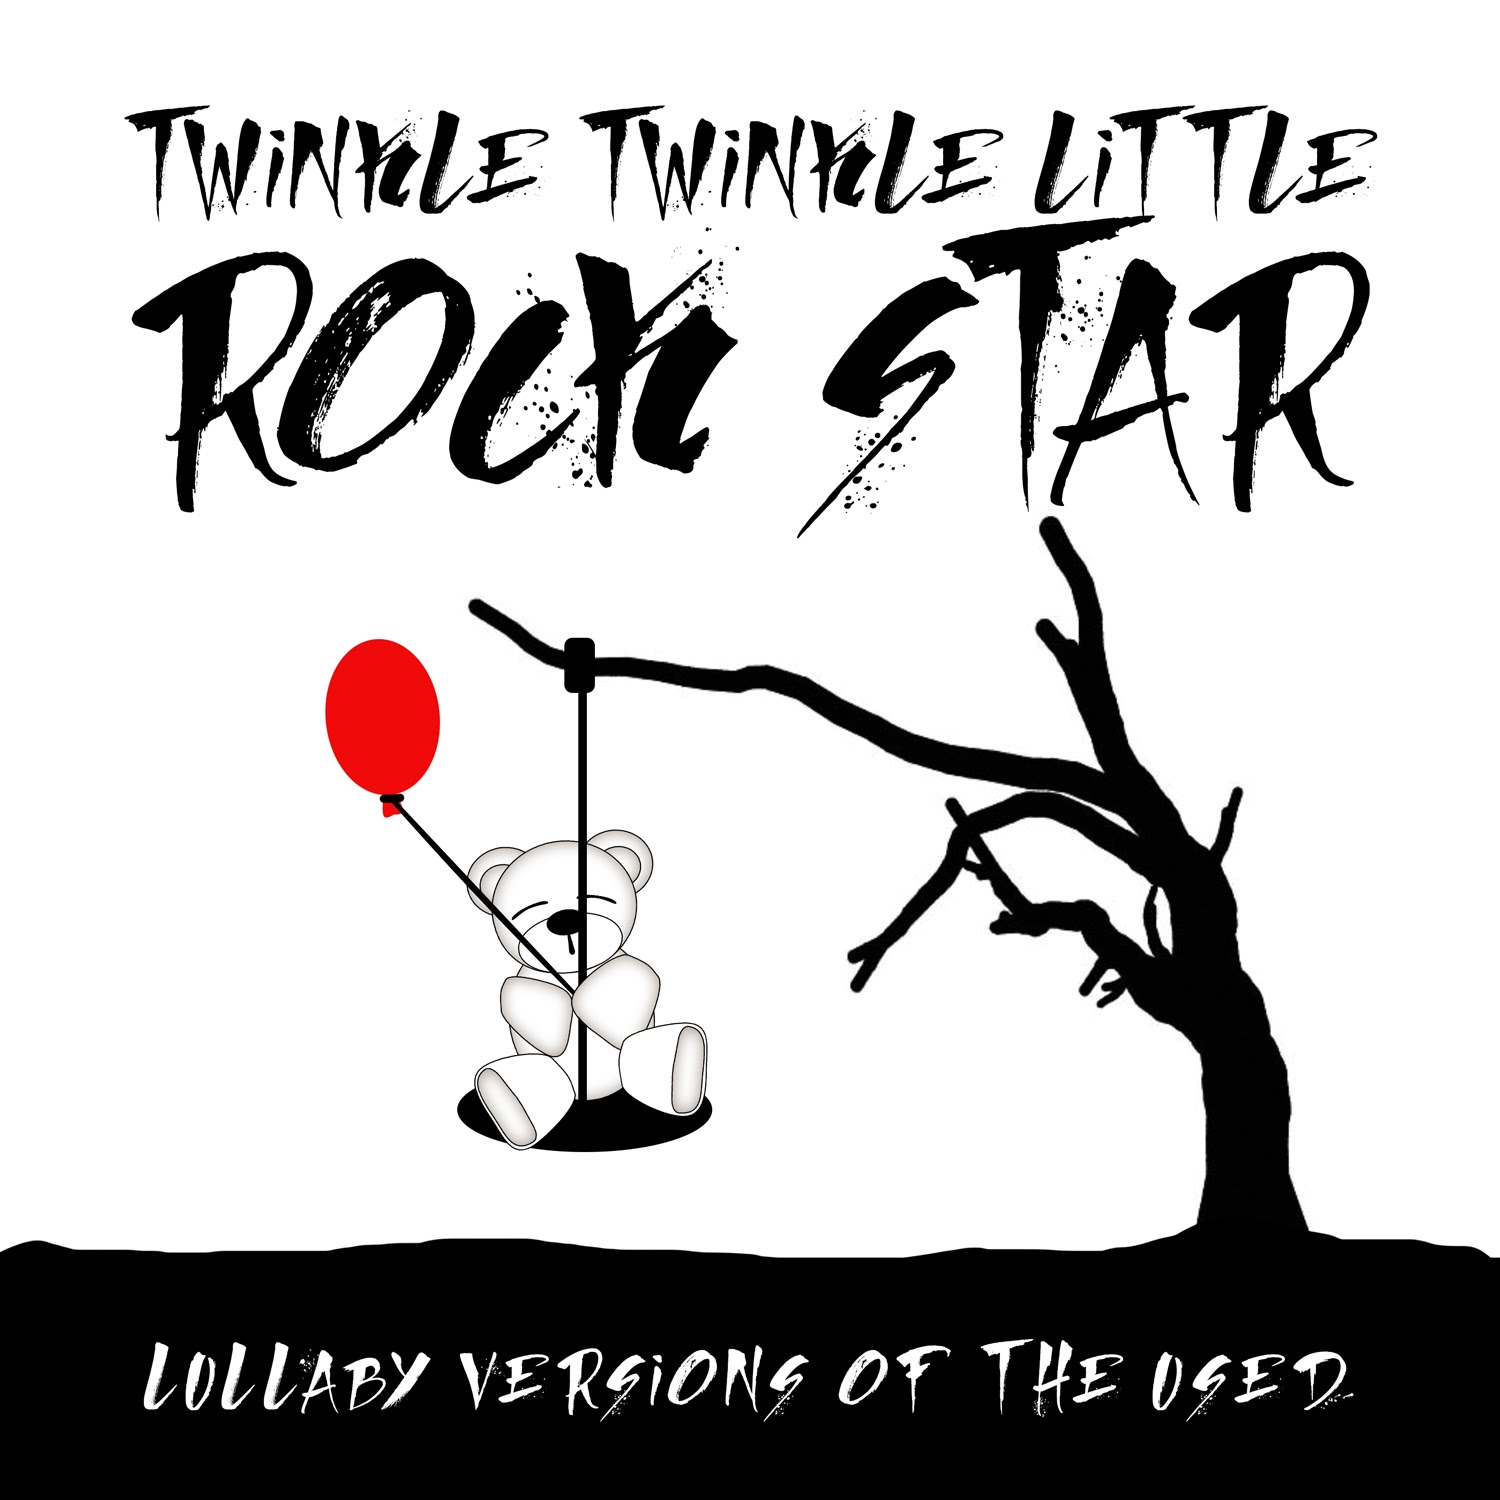 The Taste of Ink Lullaby Versions of The Used by Twinkle Twinkle ...